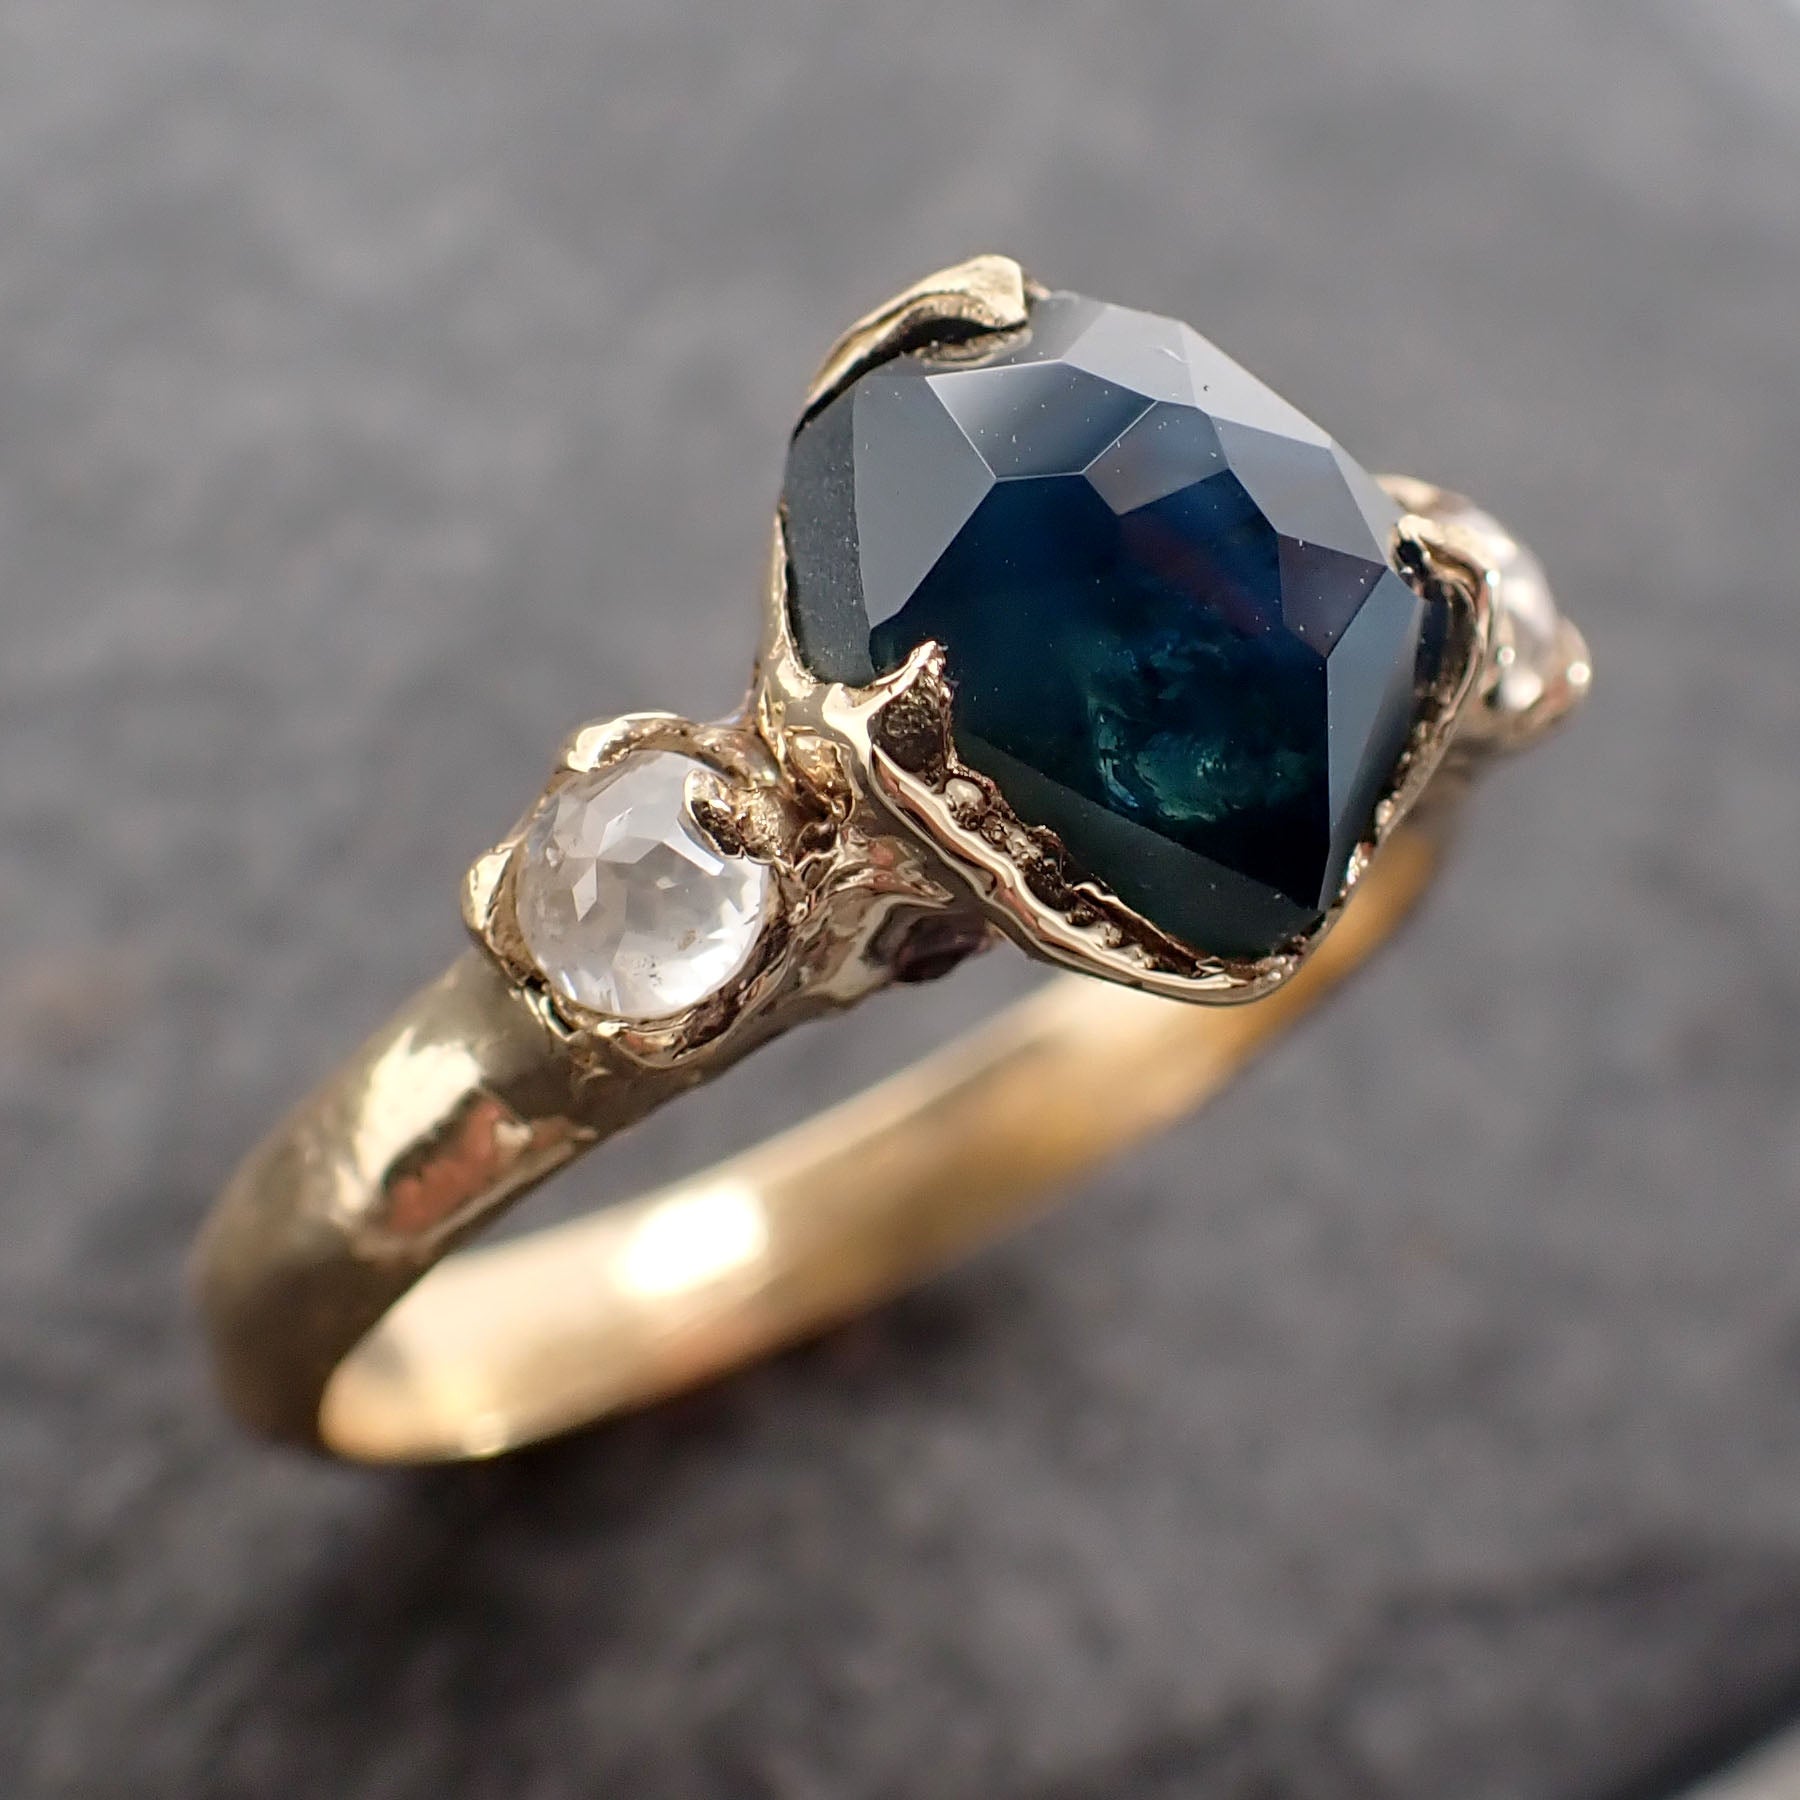 Partially faceted blue Montana Sapphire and fancy Diamonds 18k Yellow Gold Engagement Wedding Ring Gemstone Ring Multi stone Ring 2529